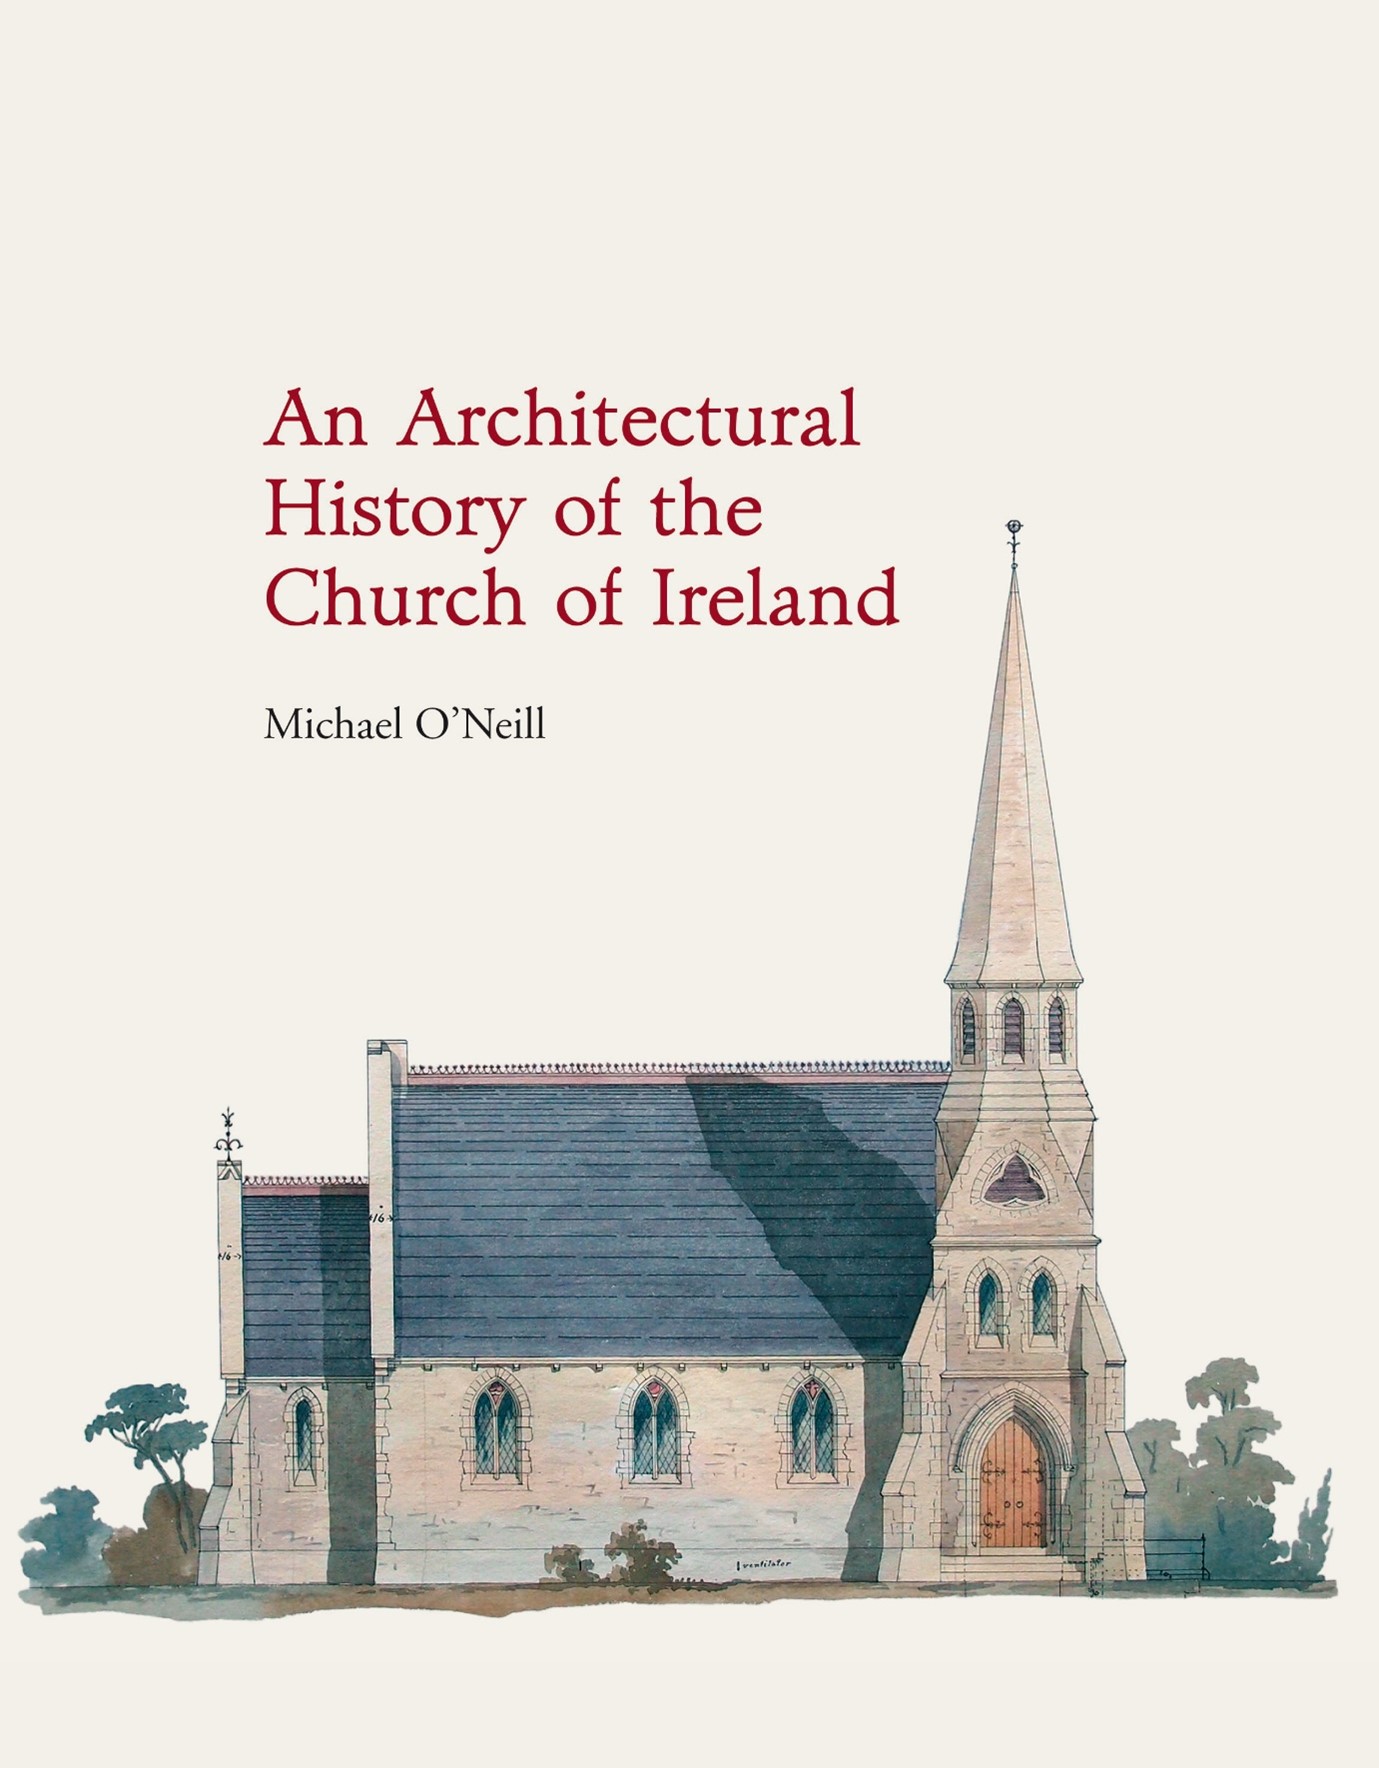 An Architectural History of the Church of Ireland, by Dr Michael O'Neill.